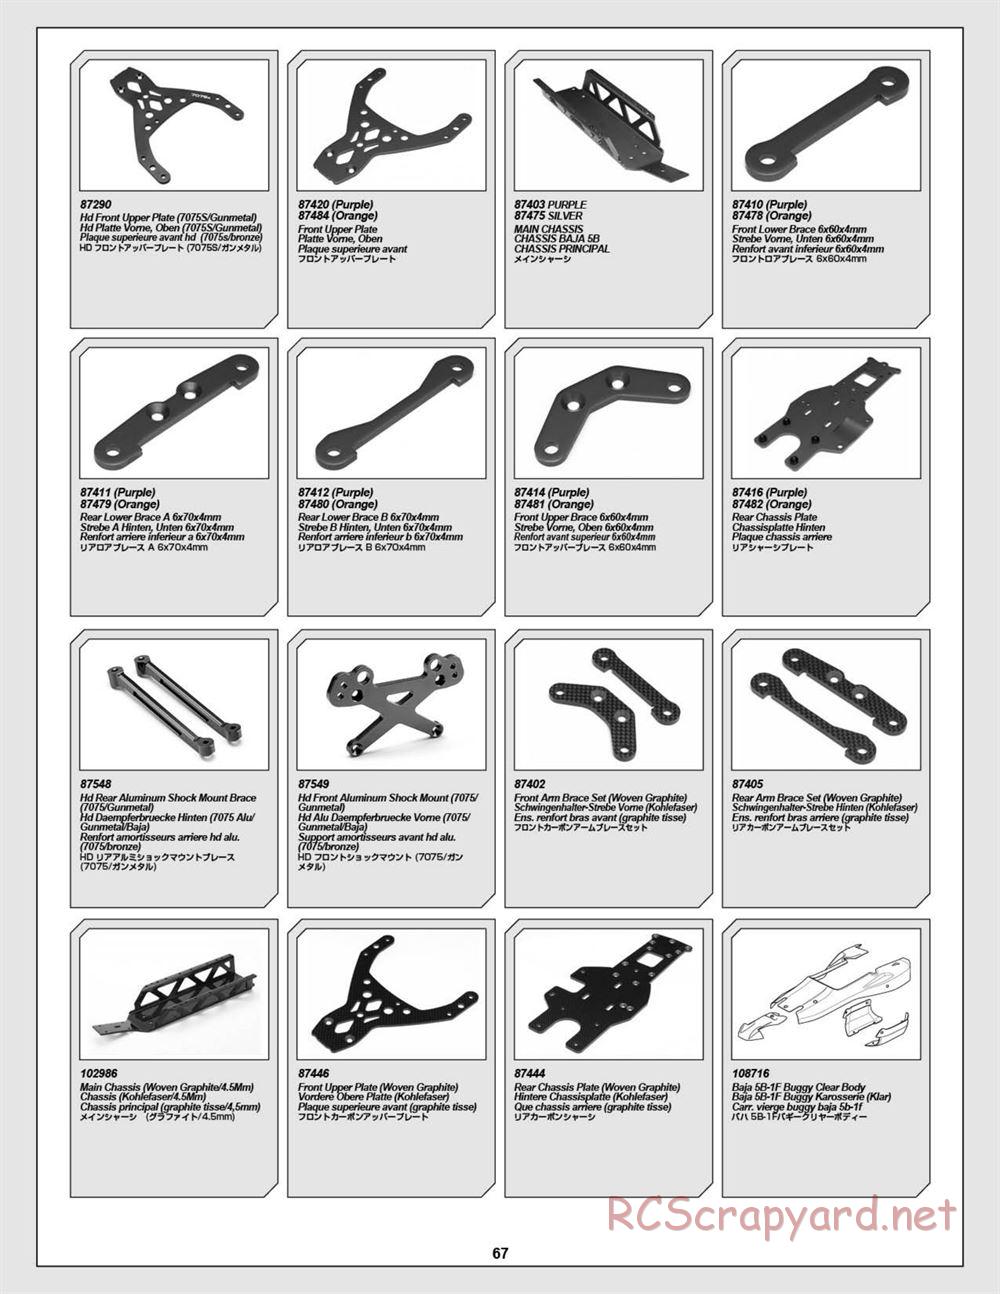 HPI - Baja 5B Flux Buggy - Exploded View - Page 67